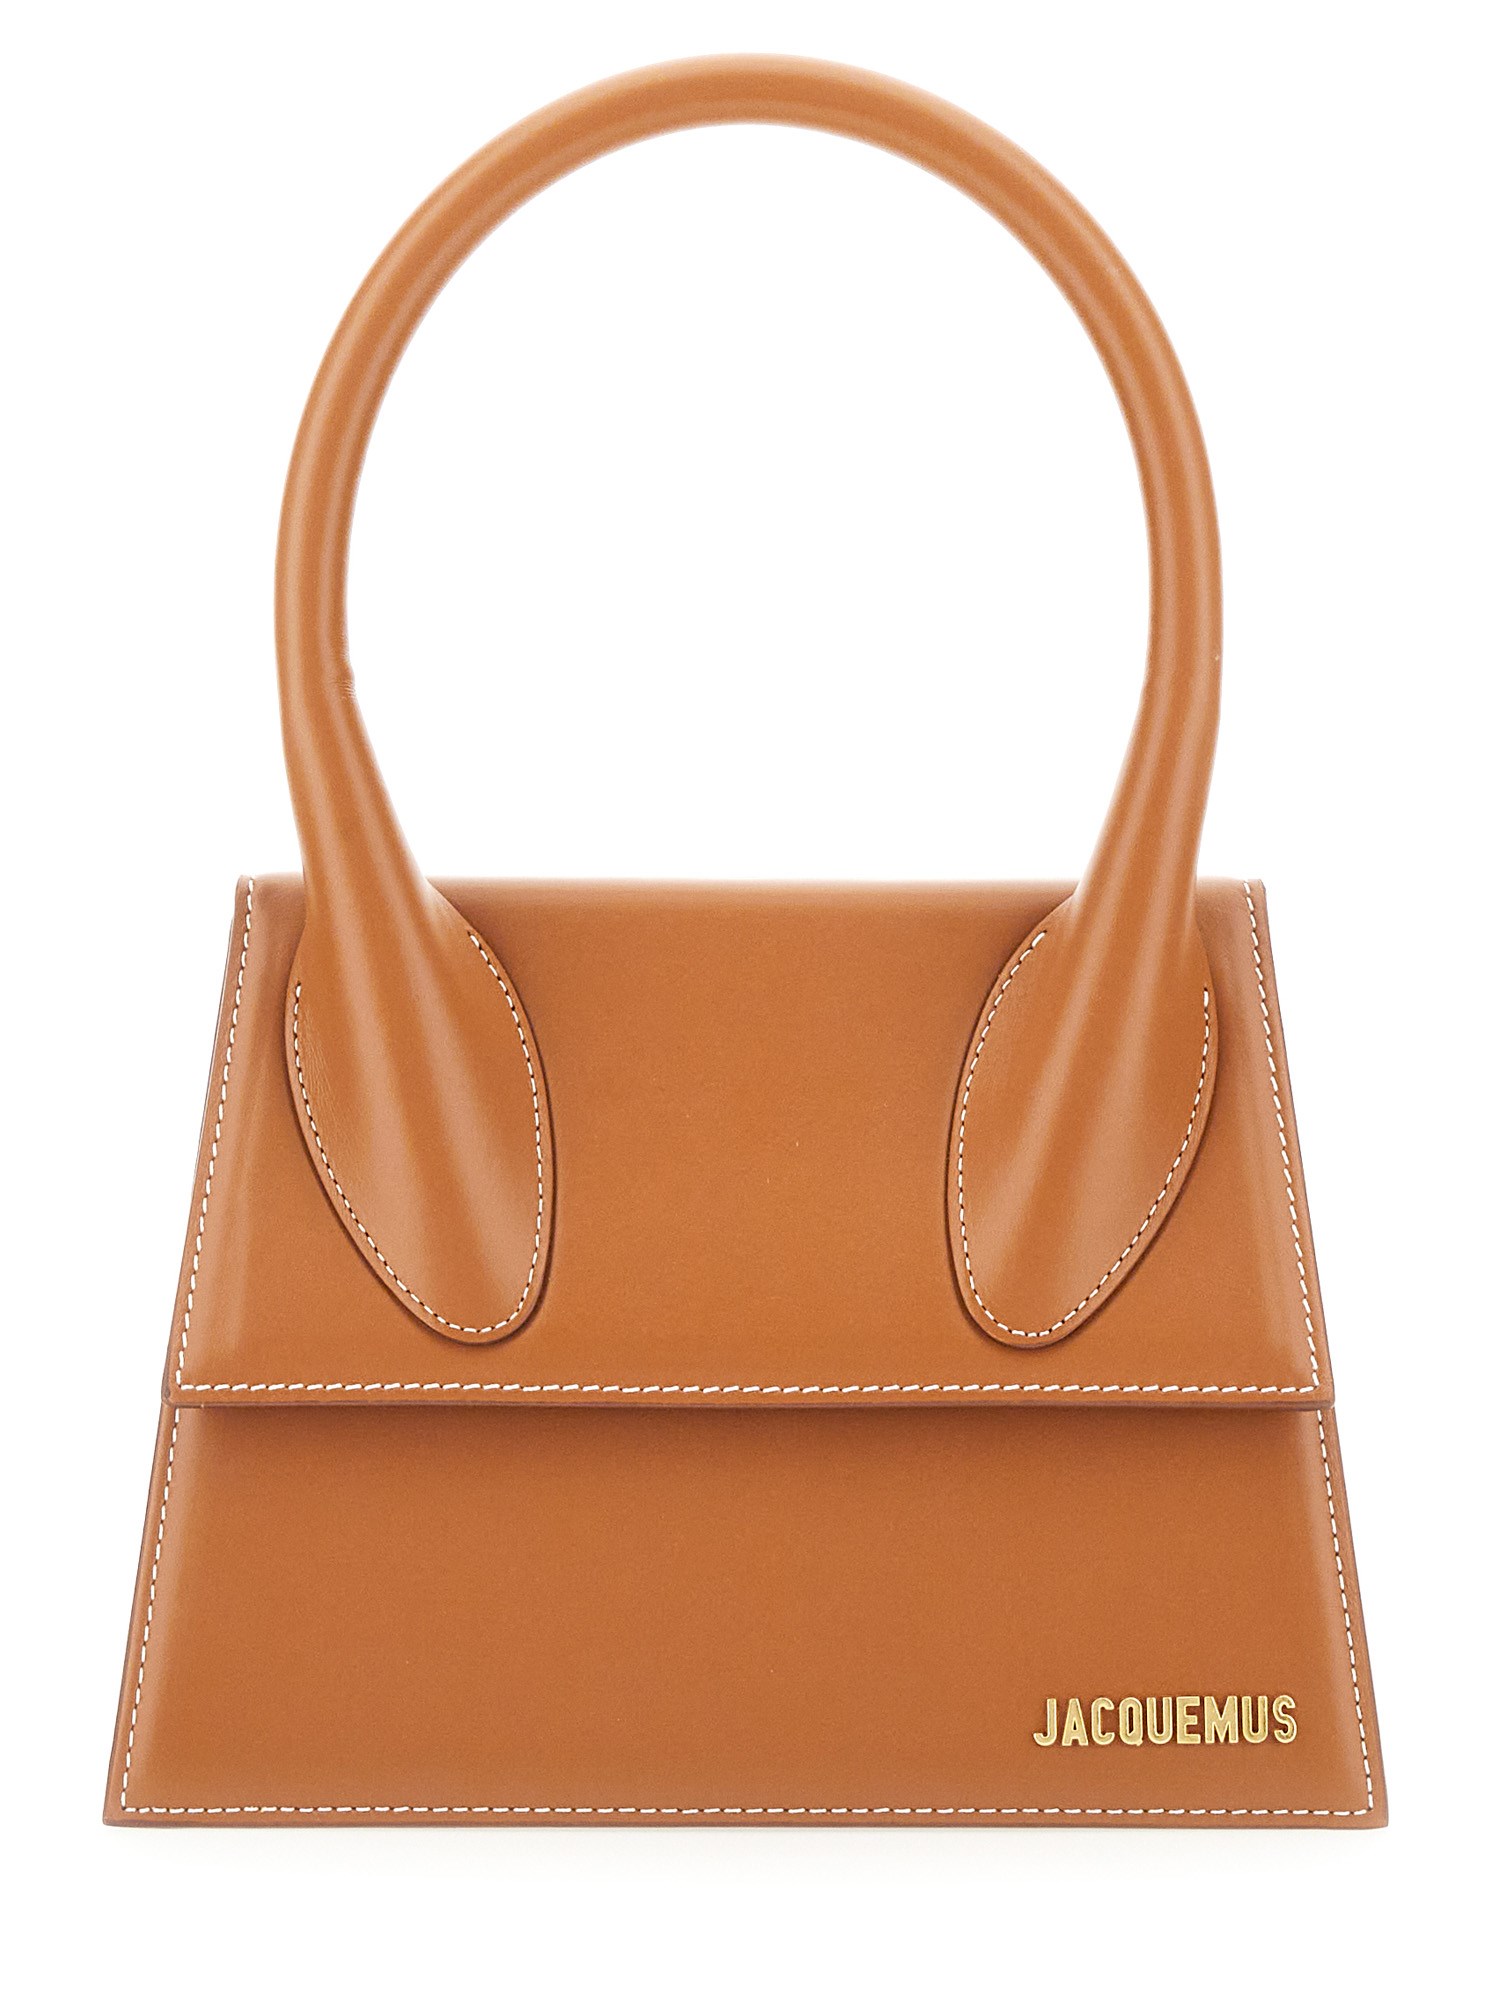 Jacquemus Le Grand Chiquito Bag In Buff